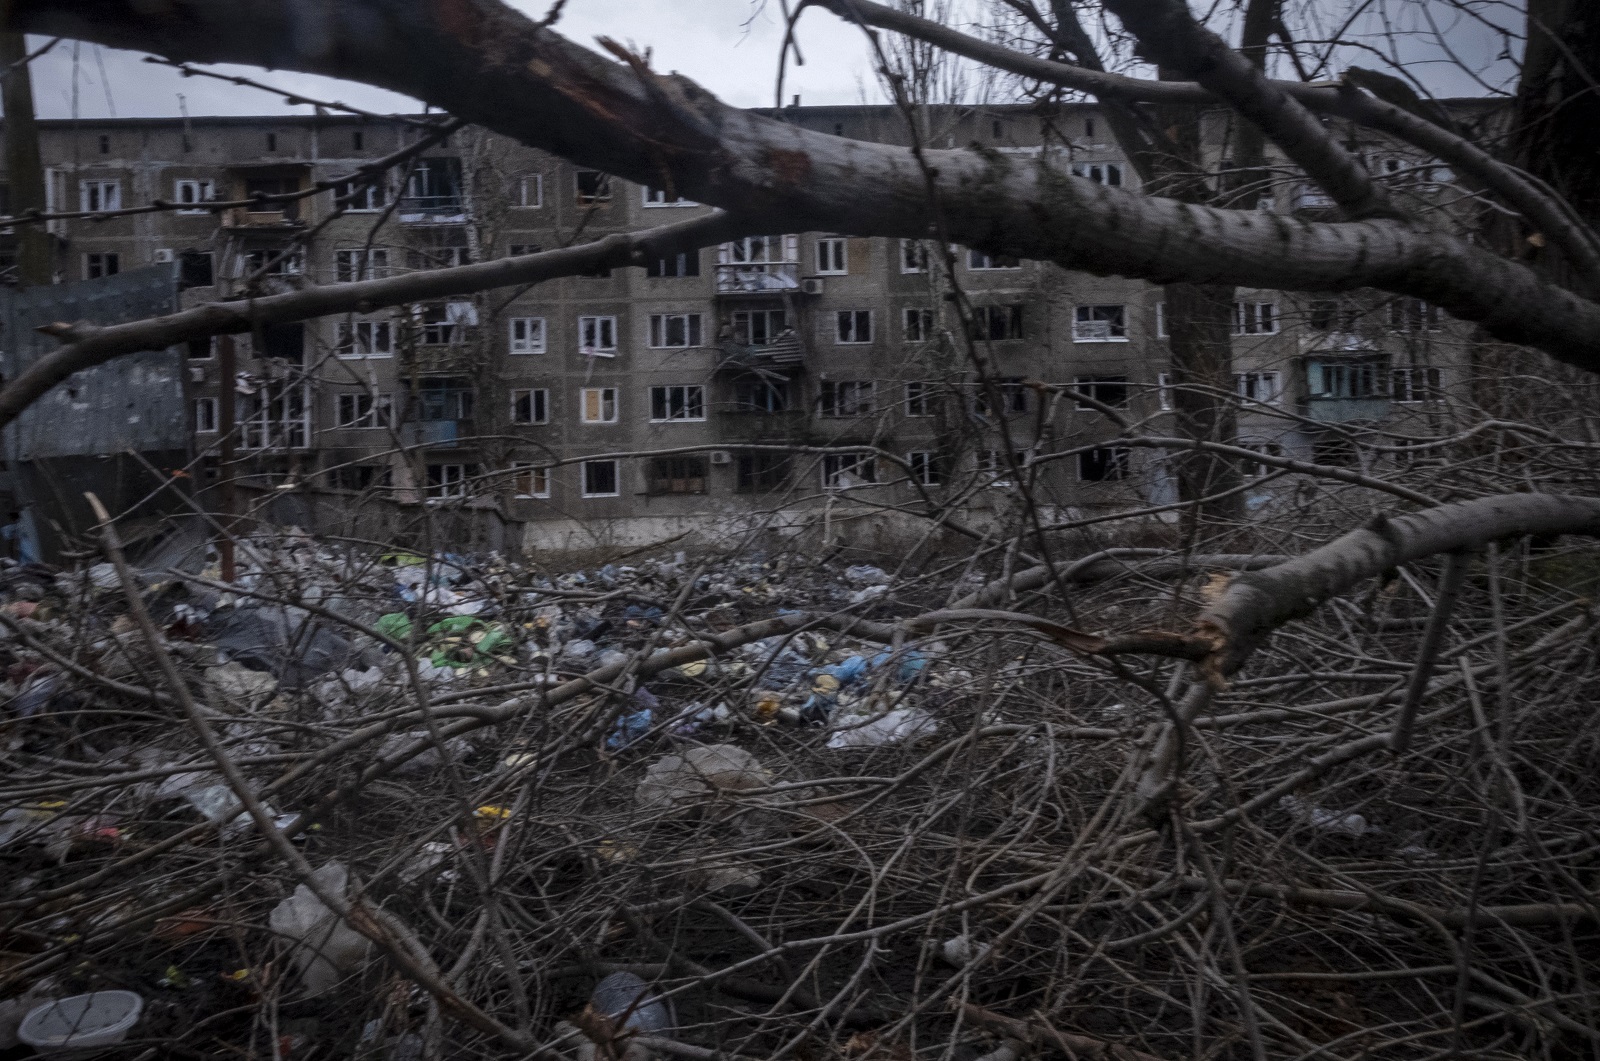 epa10492629 A view of destroyed and partially burnt out appartments of a building in Vuhledar, eastern Ukraine, 26 February 2023. The heavily destructed and embettled town is under constant Russian artillery bombardment. Vuhledar is only linked by a mud road that is within reach of Russian positions. Russian troops entered Ukrainian territory on 24 February 2022, starting a conflict that has provoked destruction and a humanitarian crisis.  EPA/RICARDO GARCIA VILANOVA